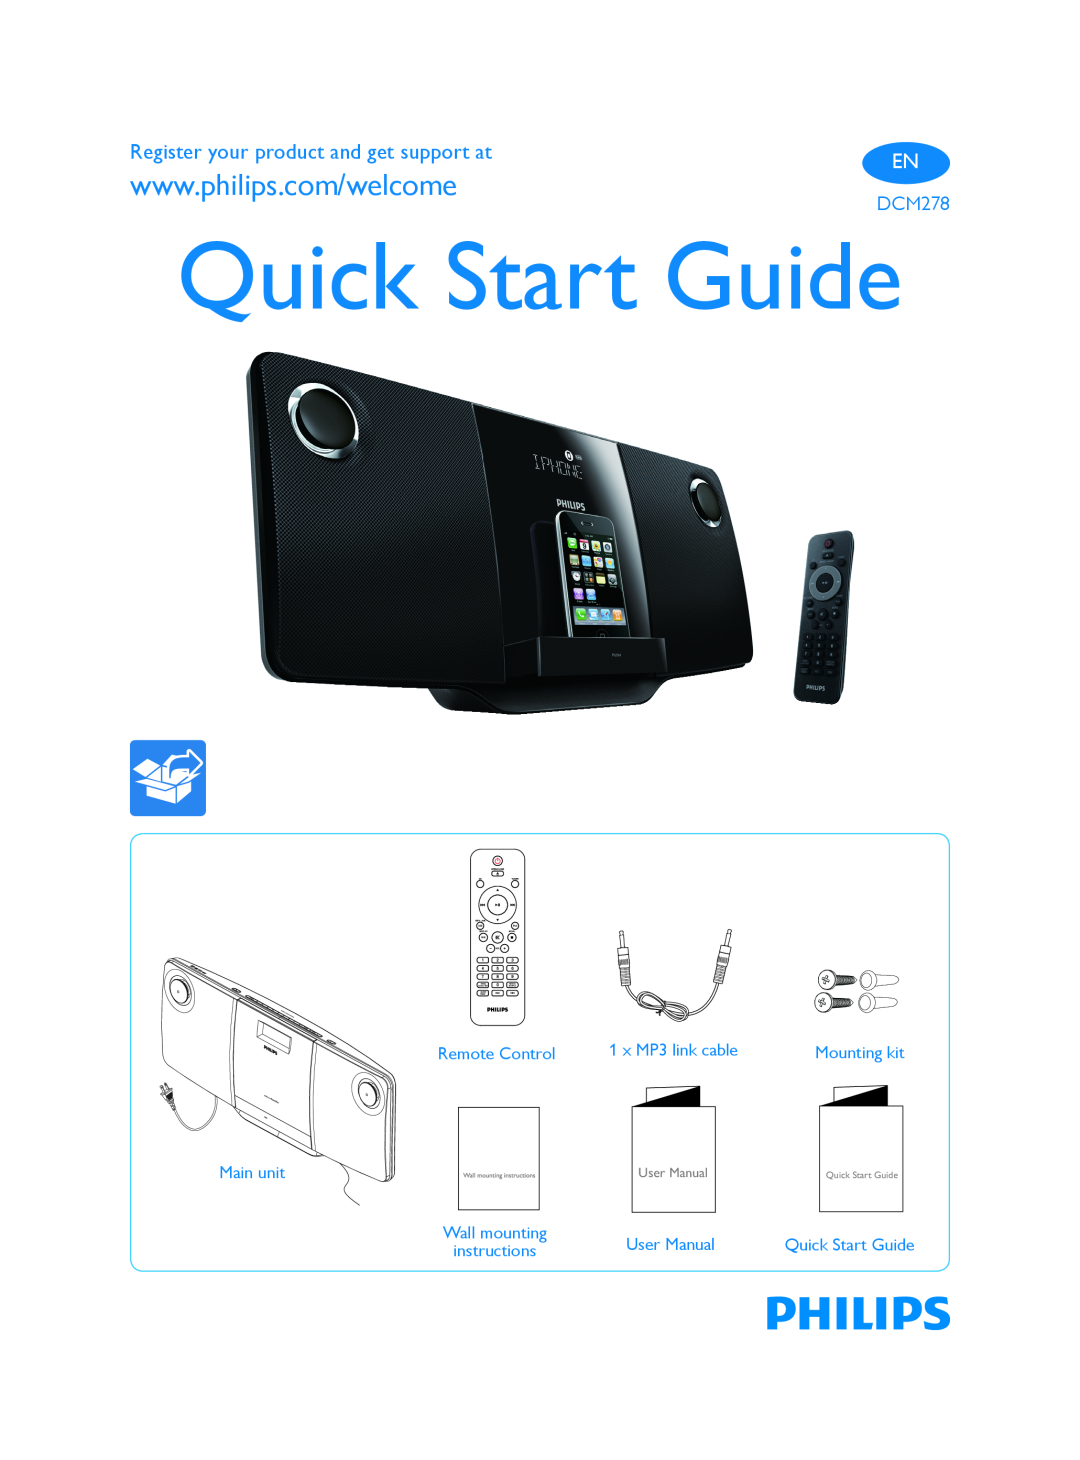 Philips DCM278/37 quick start Quick Start GuideDCM278, Register your product and get support at, Remote Control Main unit 